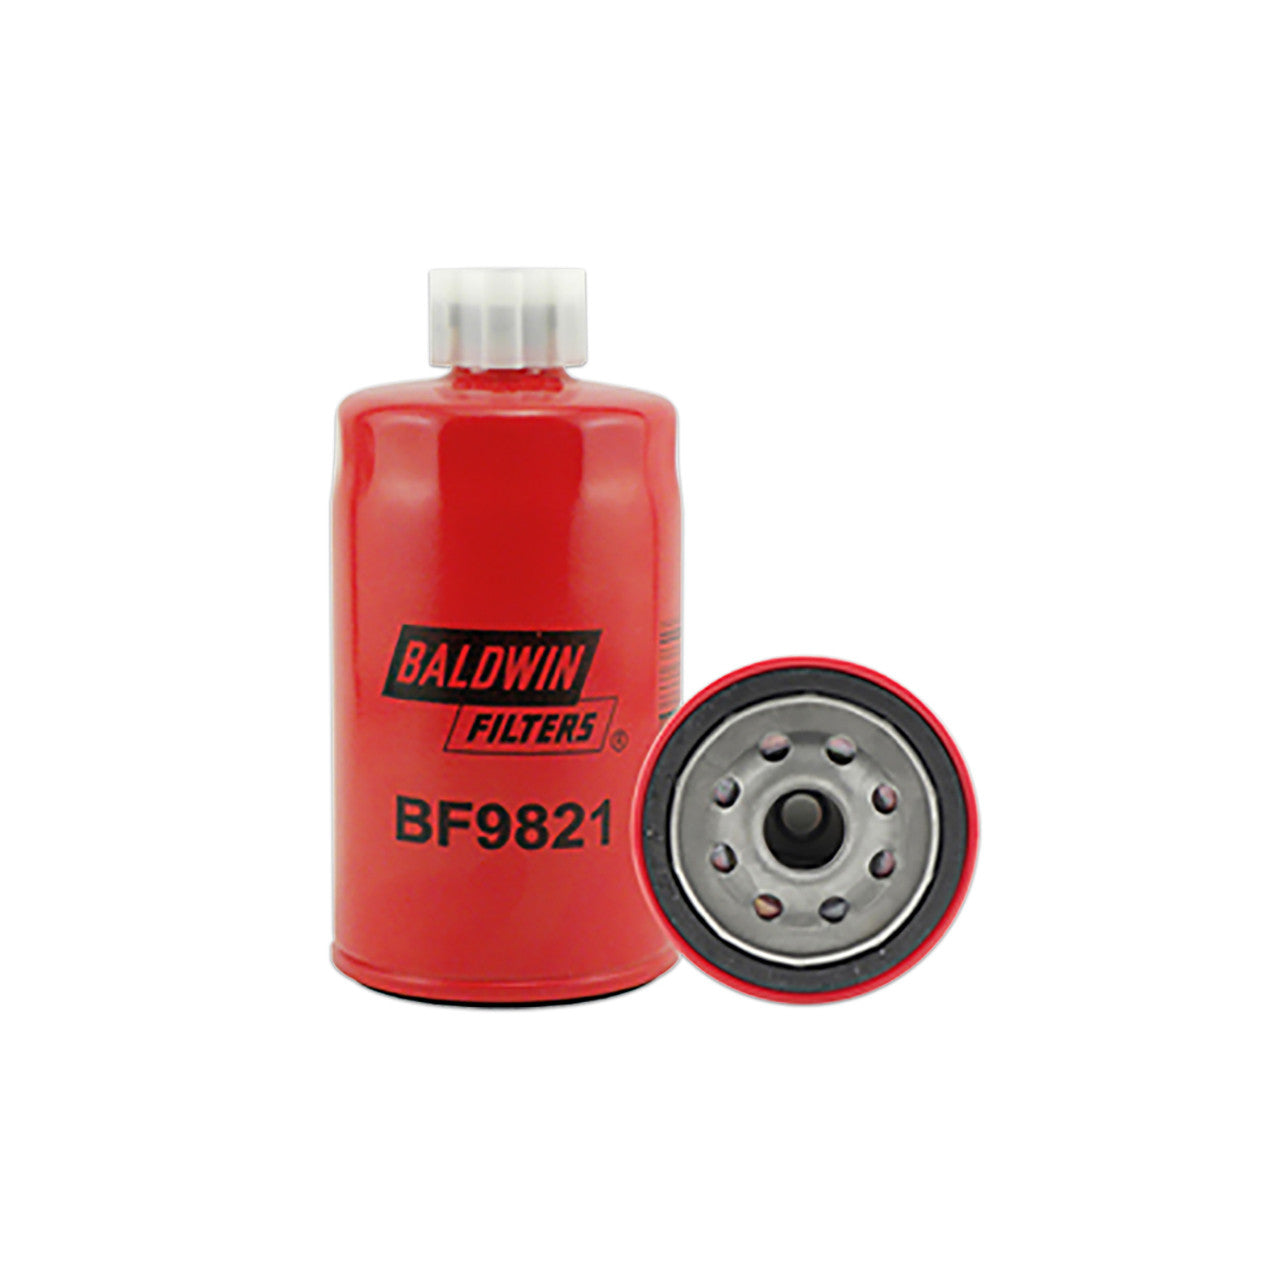 BF9821 Baldwin Fuel Spin-on with Drain replaces Clarcor CX0710B4